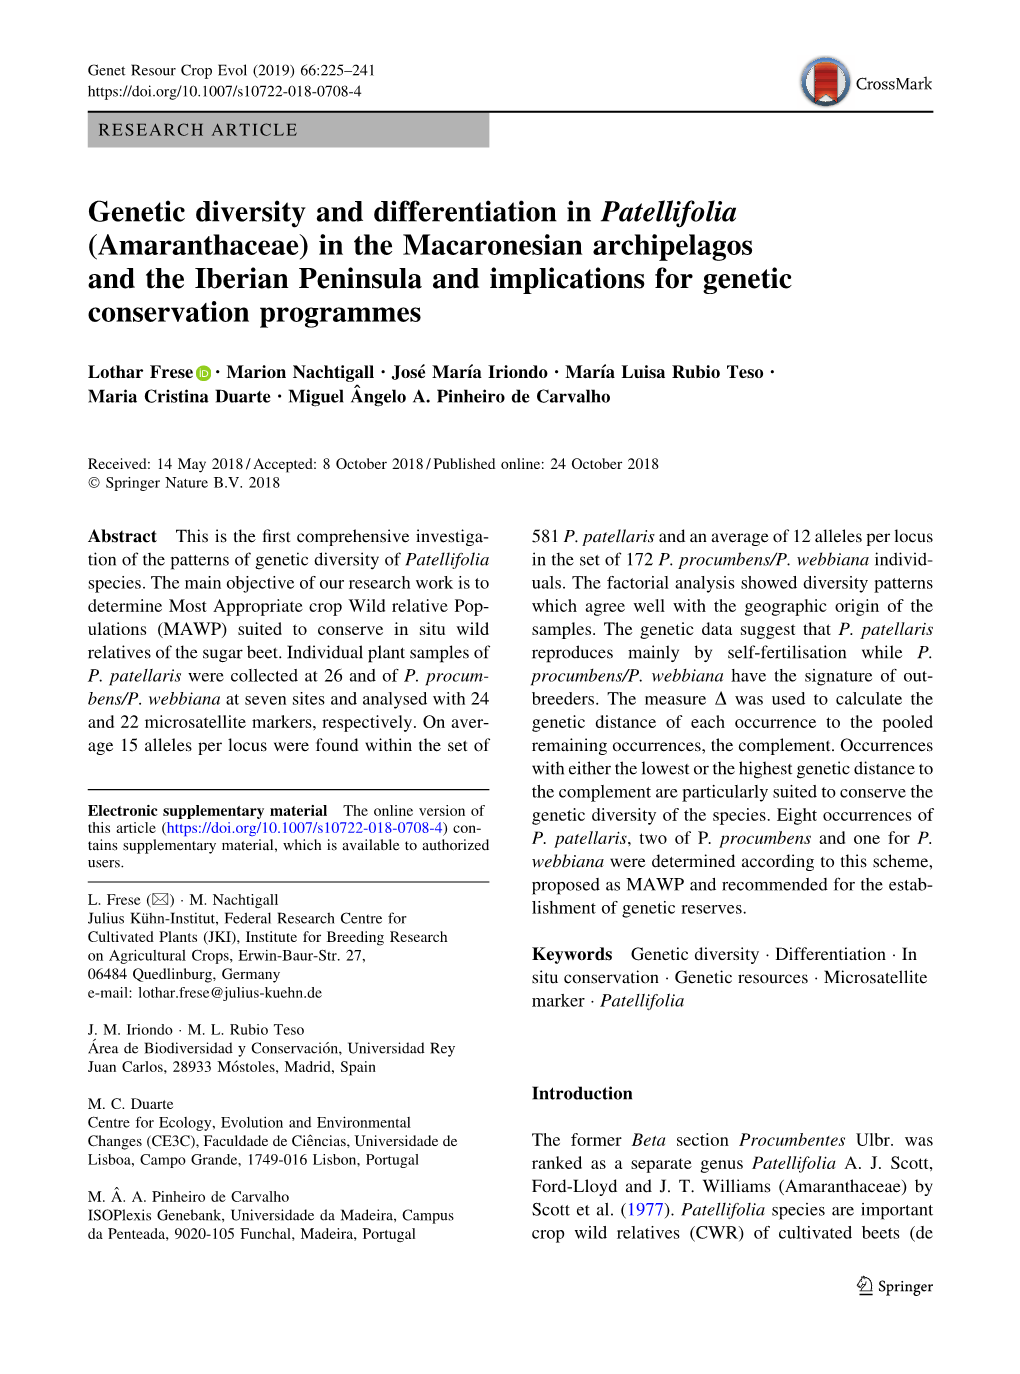 Genetic Diversity and Differentiation in Patellifolia (Amaranthaceae) in The